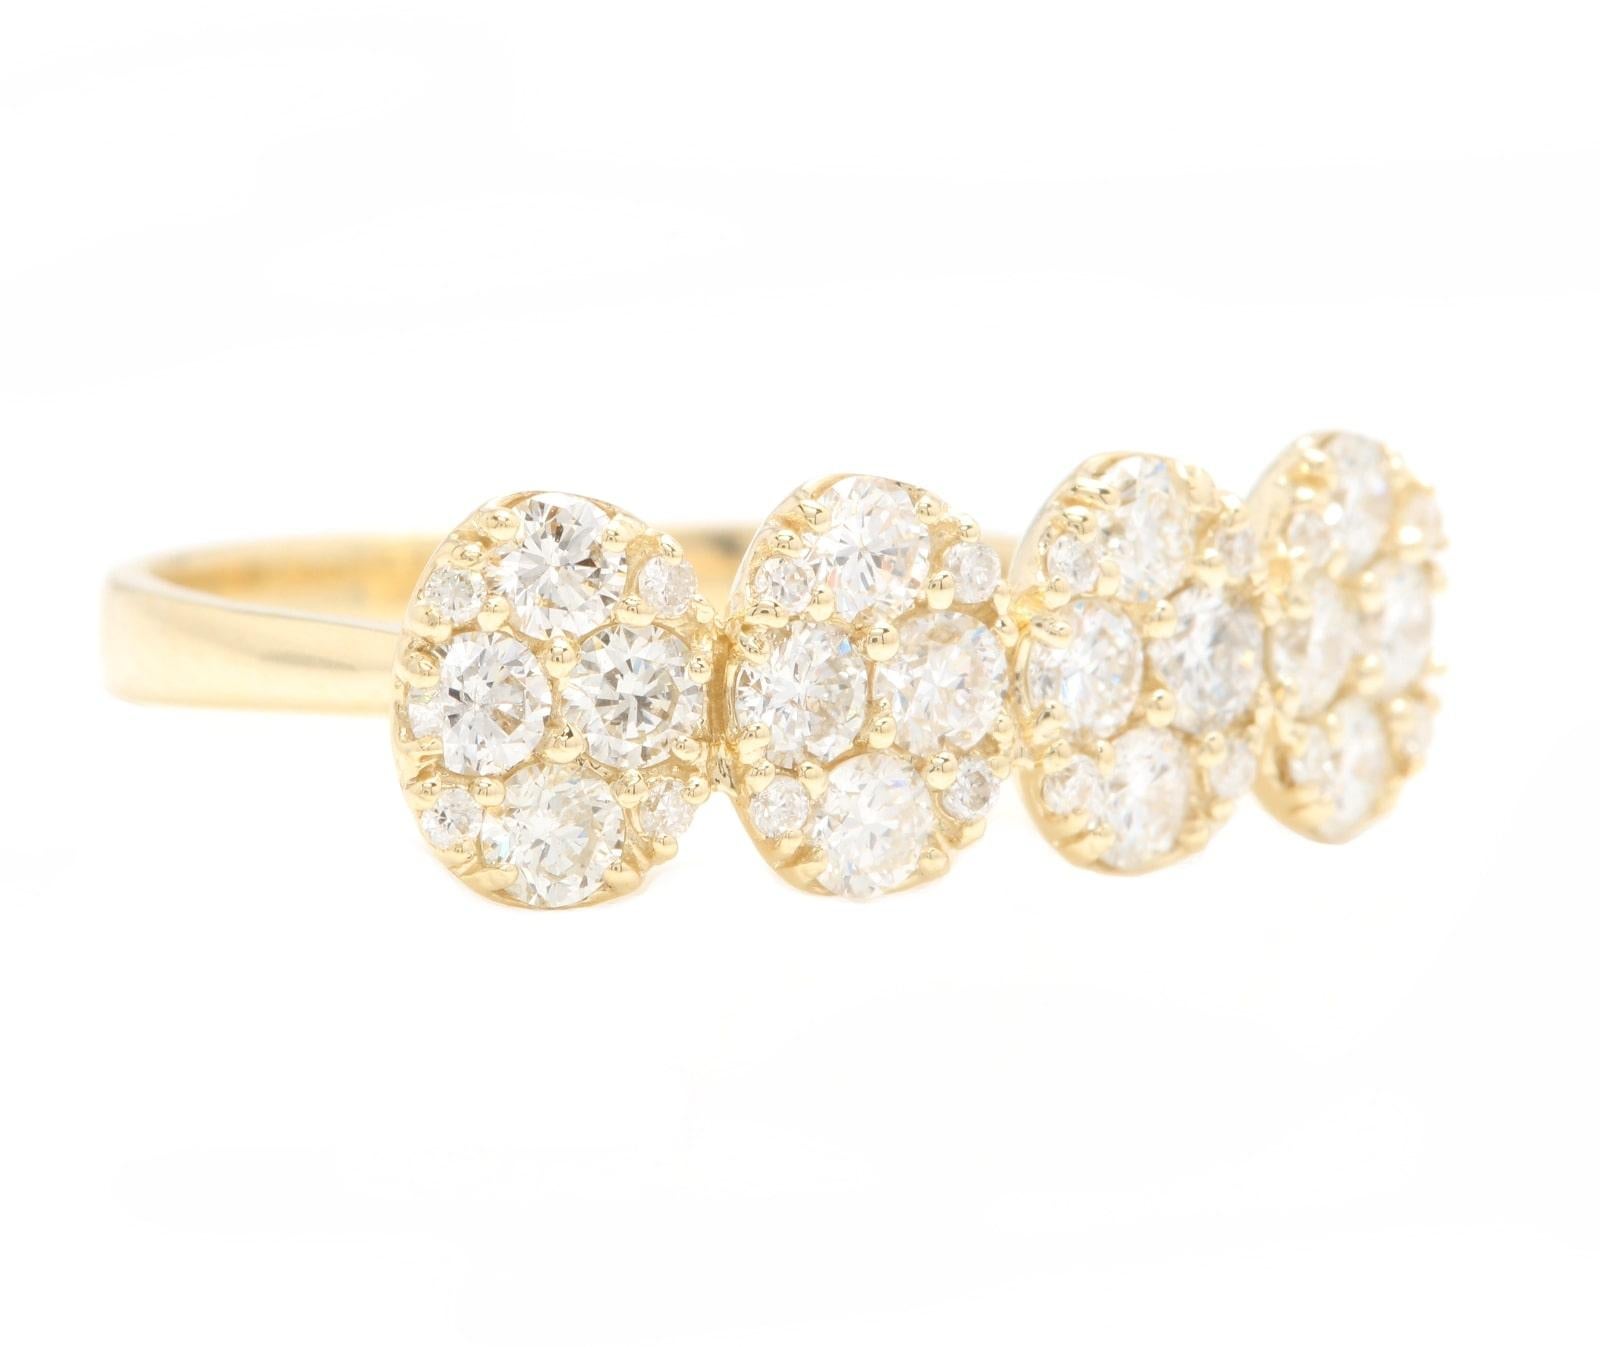 Superb 1.20 Carats Natural Diamond 14K Solid Yellow Gold Ring

Suggested Replacement Value: Approx. $3,500.00

Stamped: 14K

Total Natural Round Cut Diamonds Weight: Approx. 1.20 Carats (color G-H / Clarity SI1-SI2)

The width of the ring is: